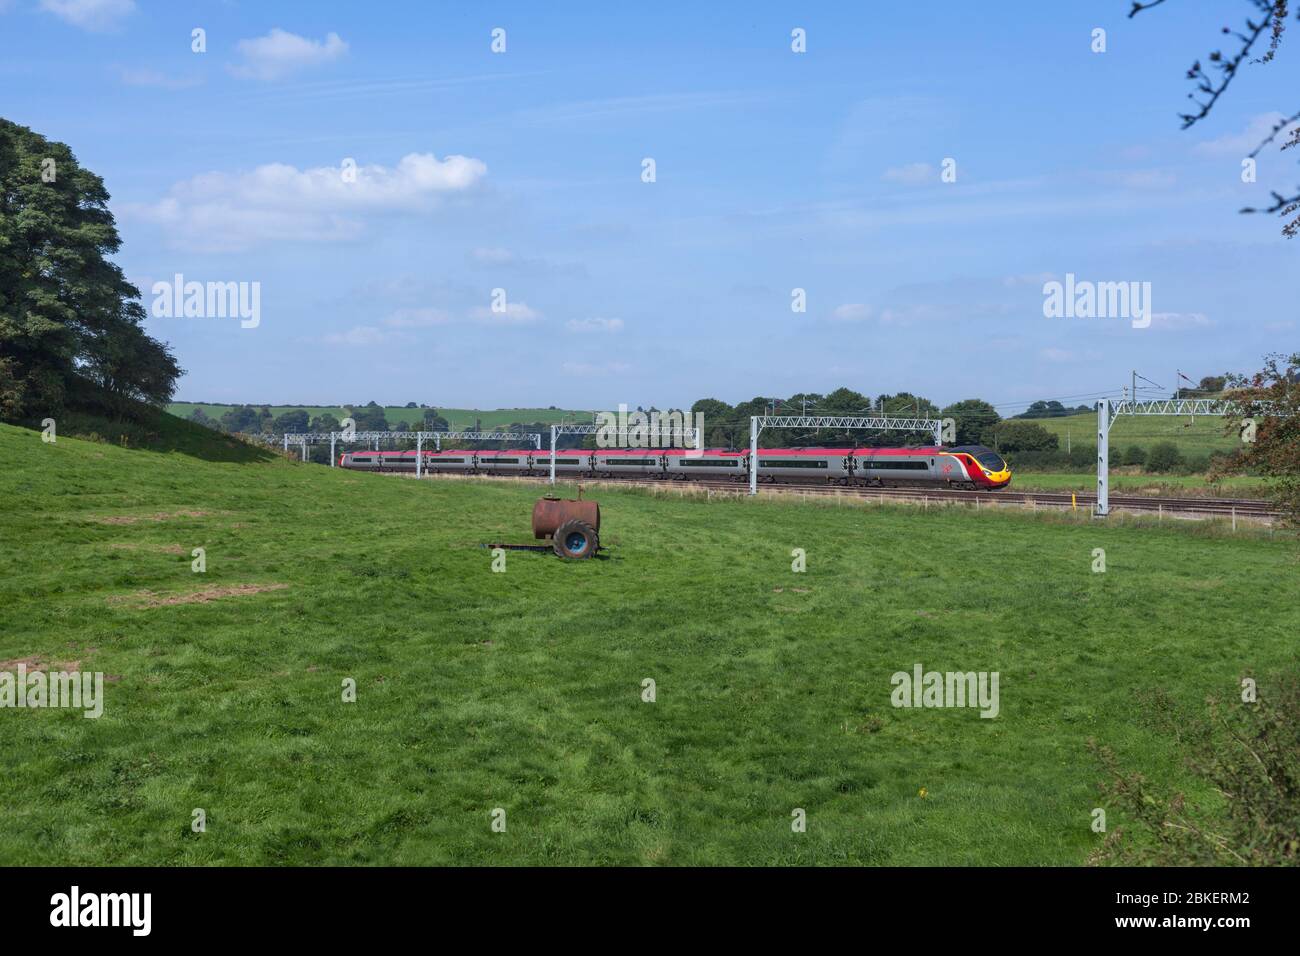 Virgin trains class 390 Alstom Pendolino passing through the countryside at Stableford, Staffordshire on the 4 track west coast mainline Stock Photo